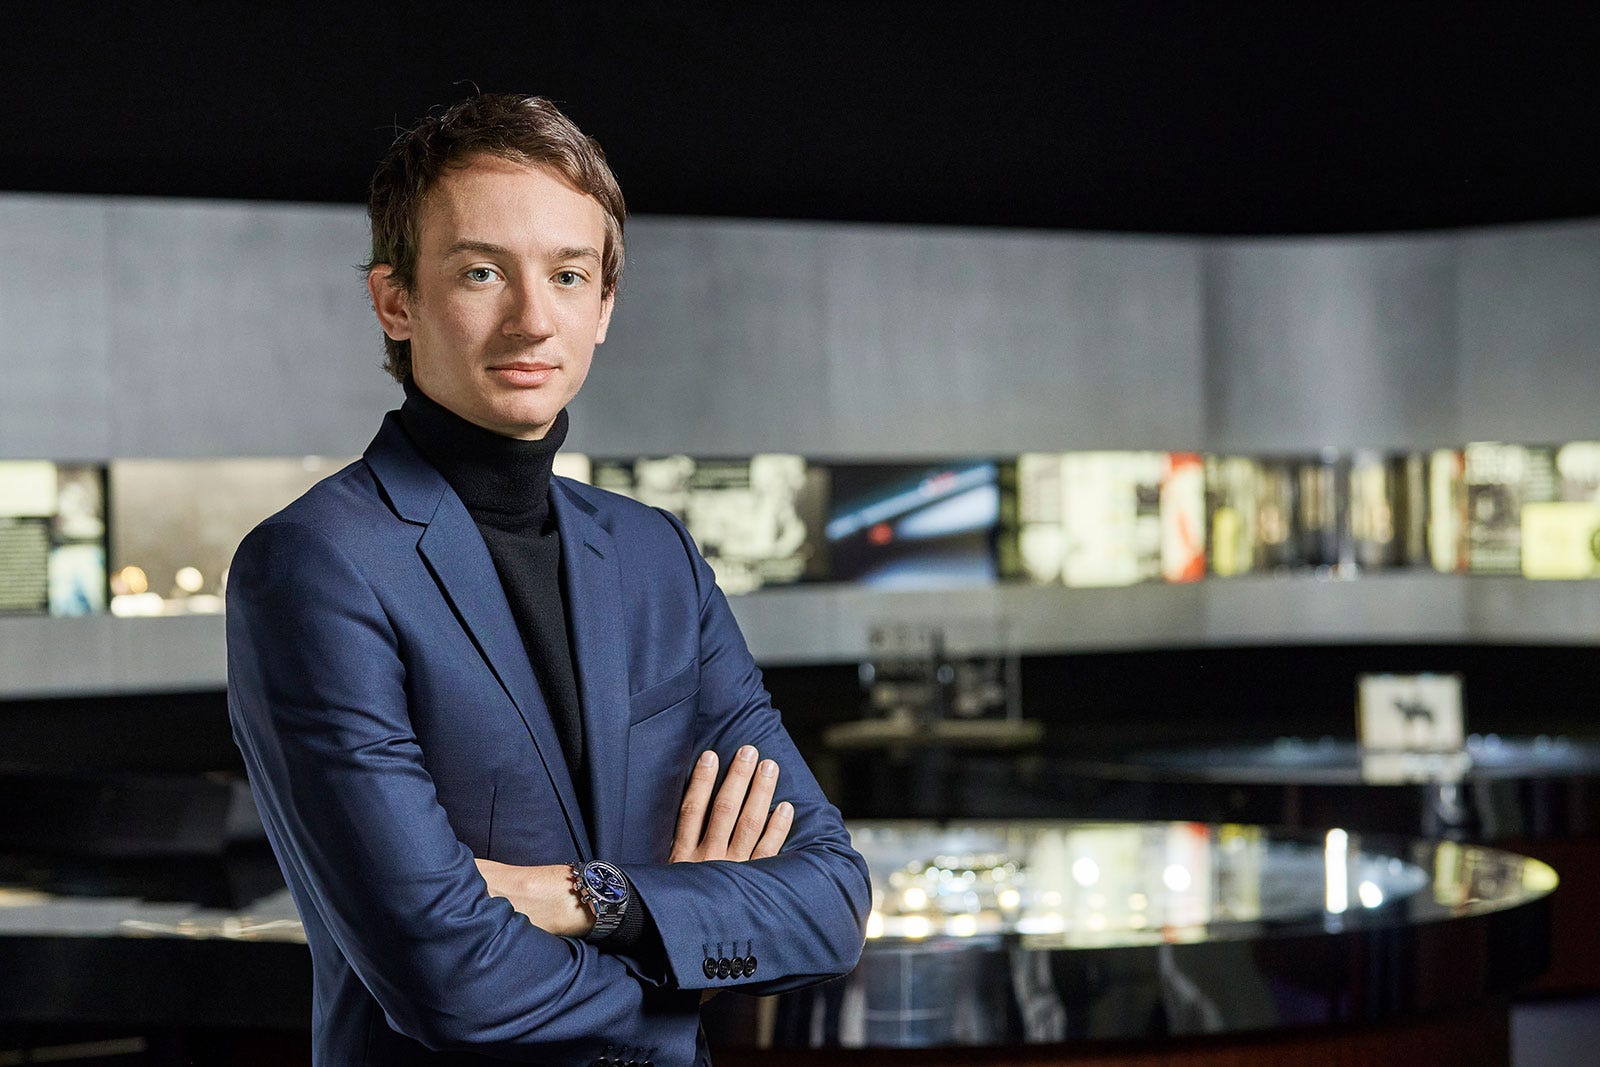 An Arnault, in Private and in Public - The New York Times